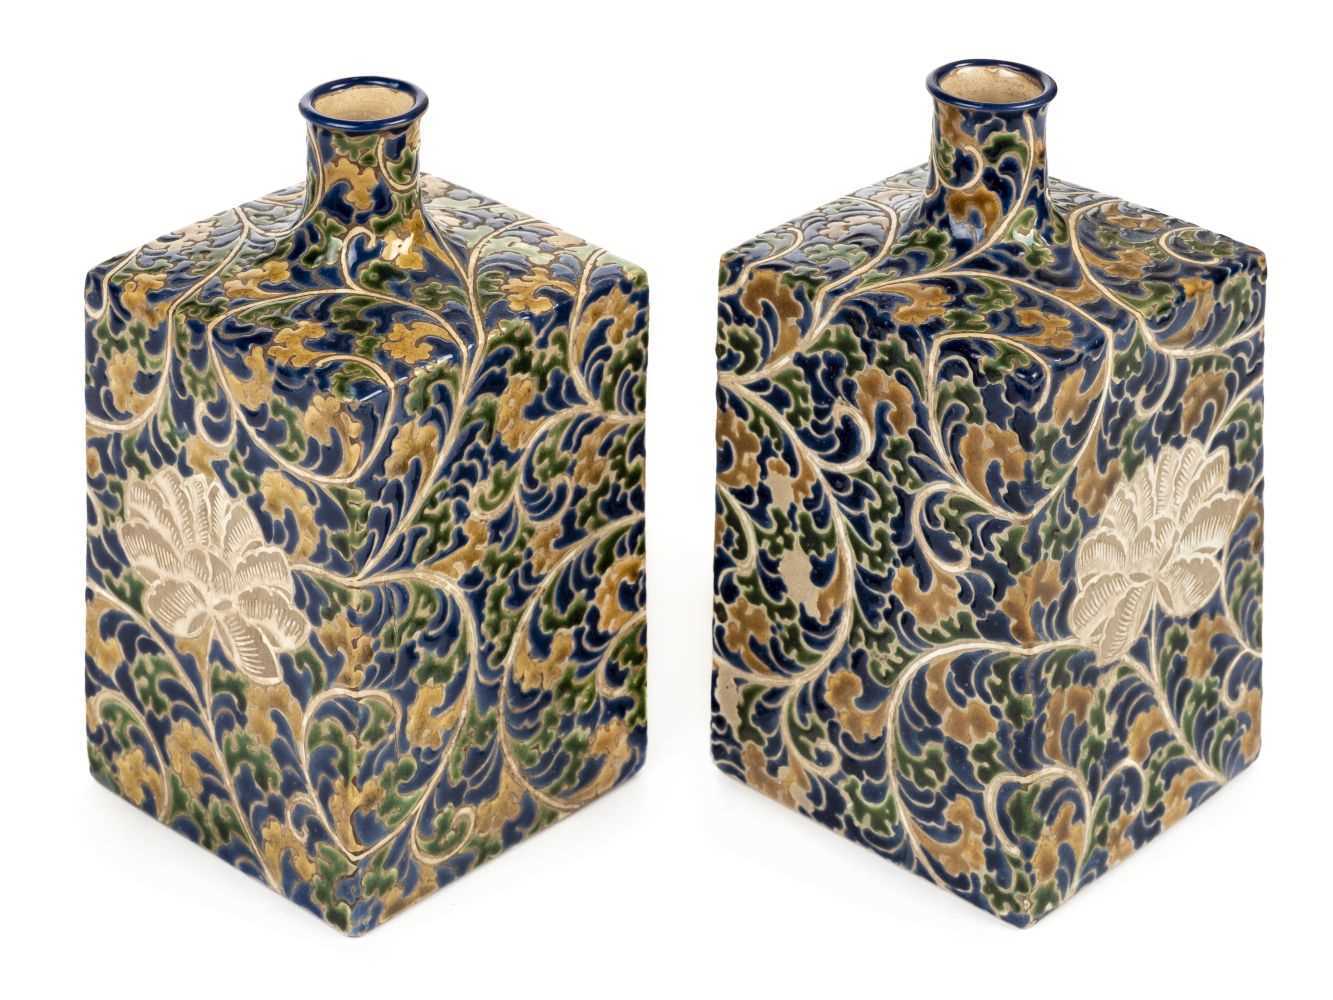 Lot 104 - Vases. A pair of Japanese pottery vases, Meiji period (1868-1912)